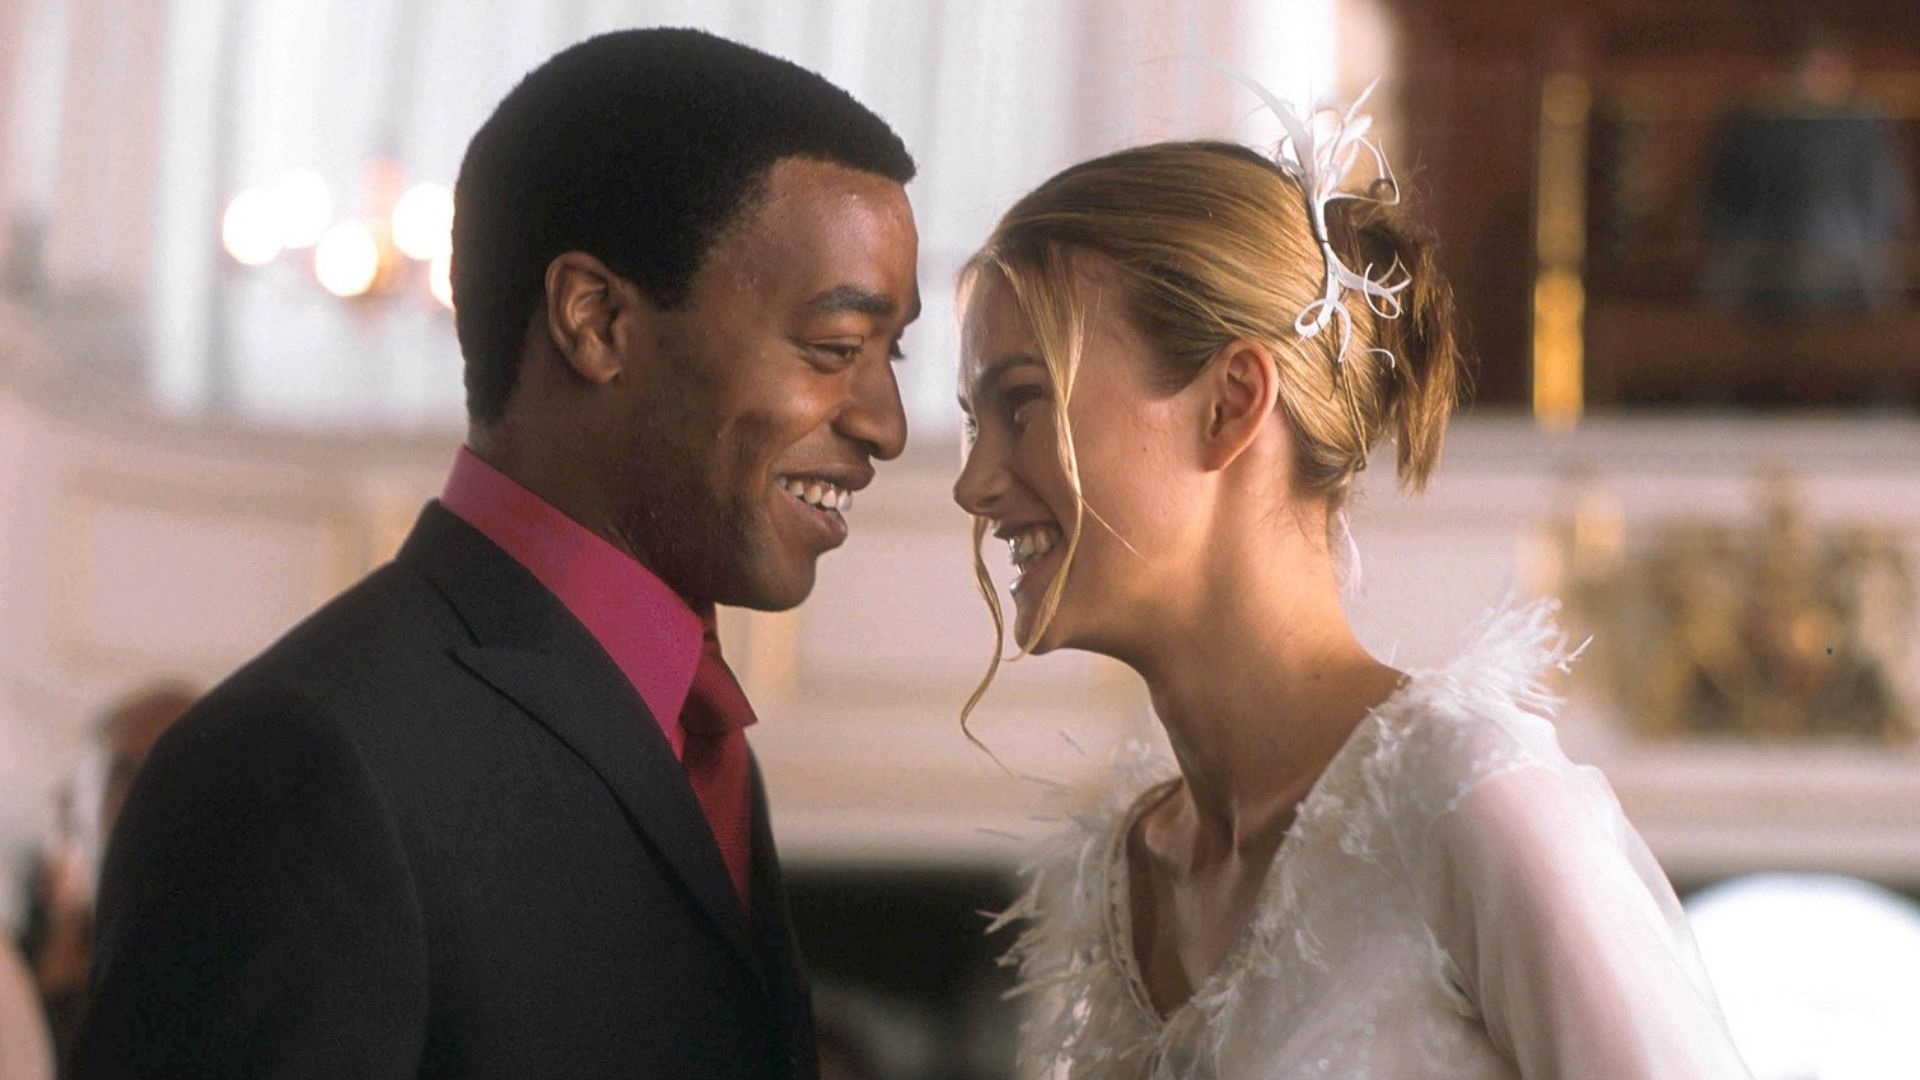 Chiwetel Ejiofor and Keira Knightley in Love Actually